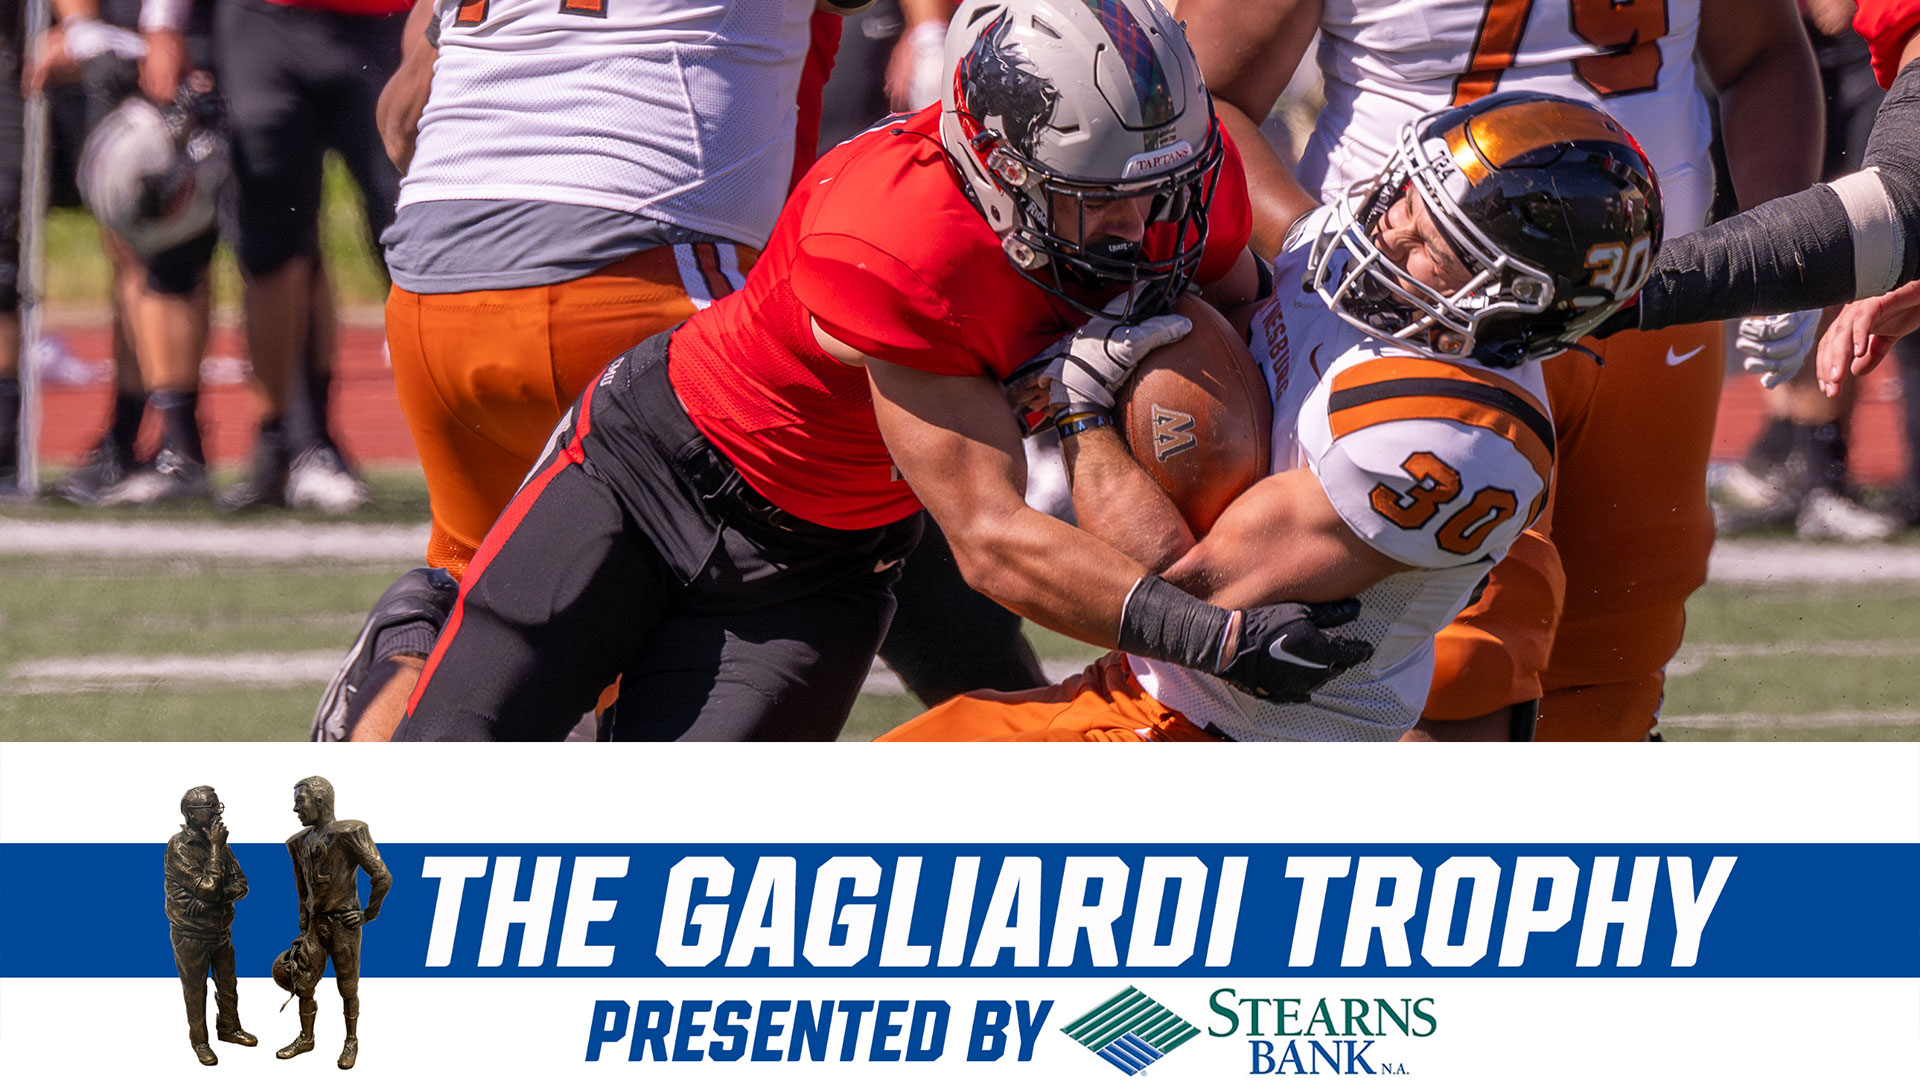 football player wearing red jersey and black pants tackles player wearing white jersey and orange pants with text readying The Gagliardi Trophy Presented by Stearns Bank